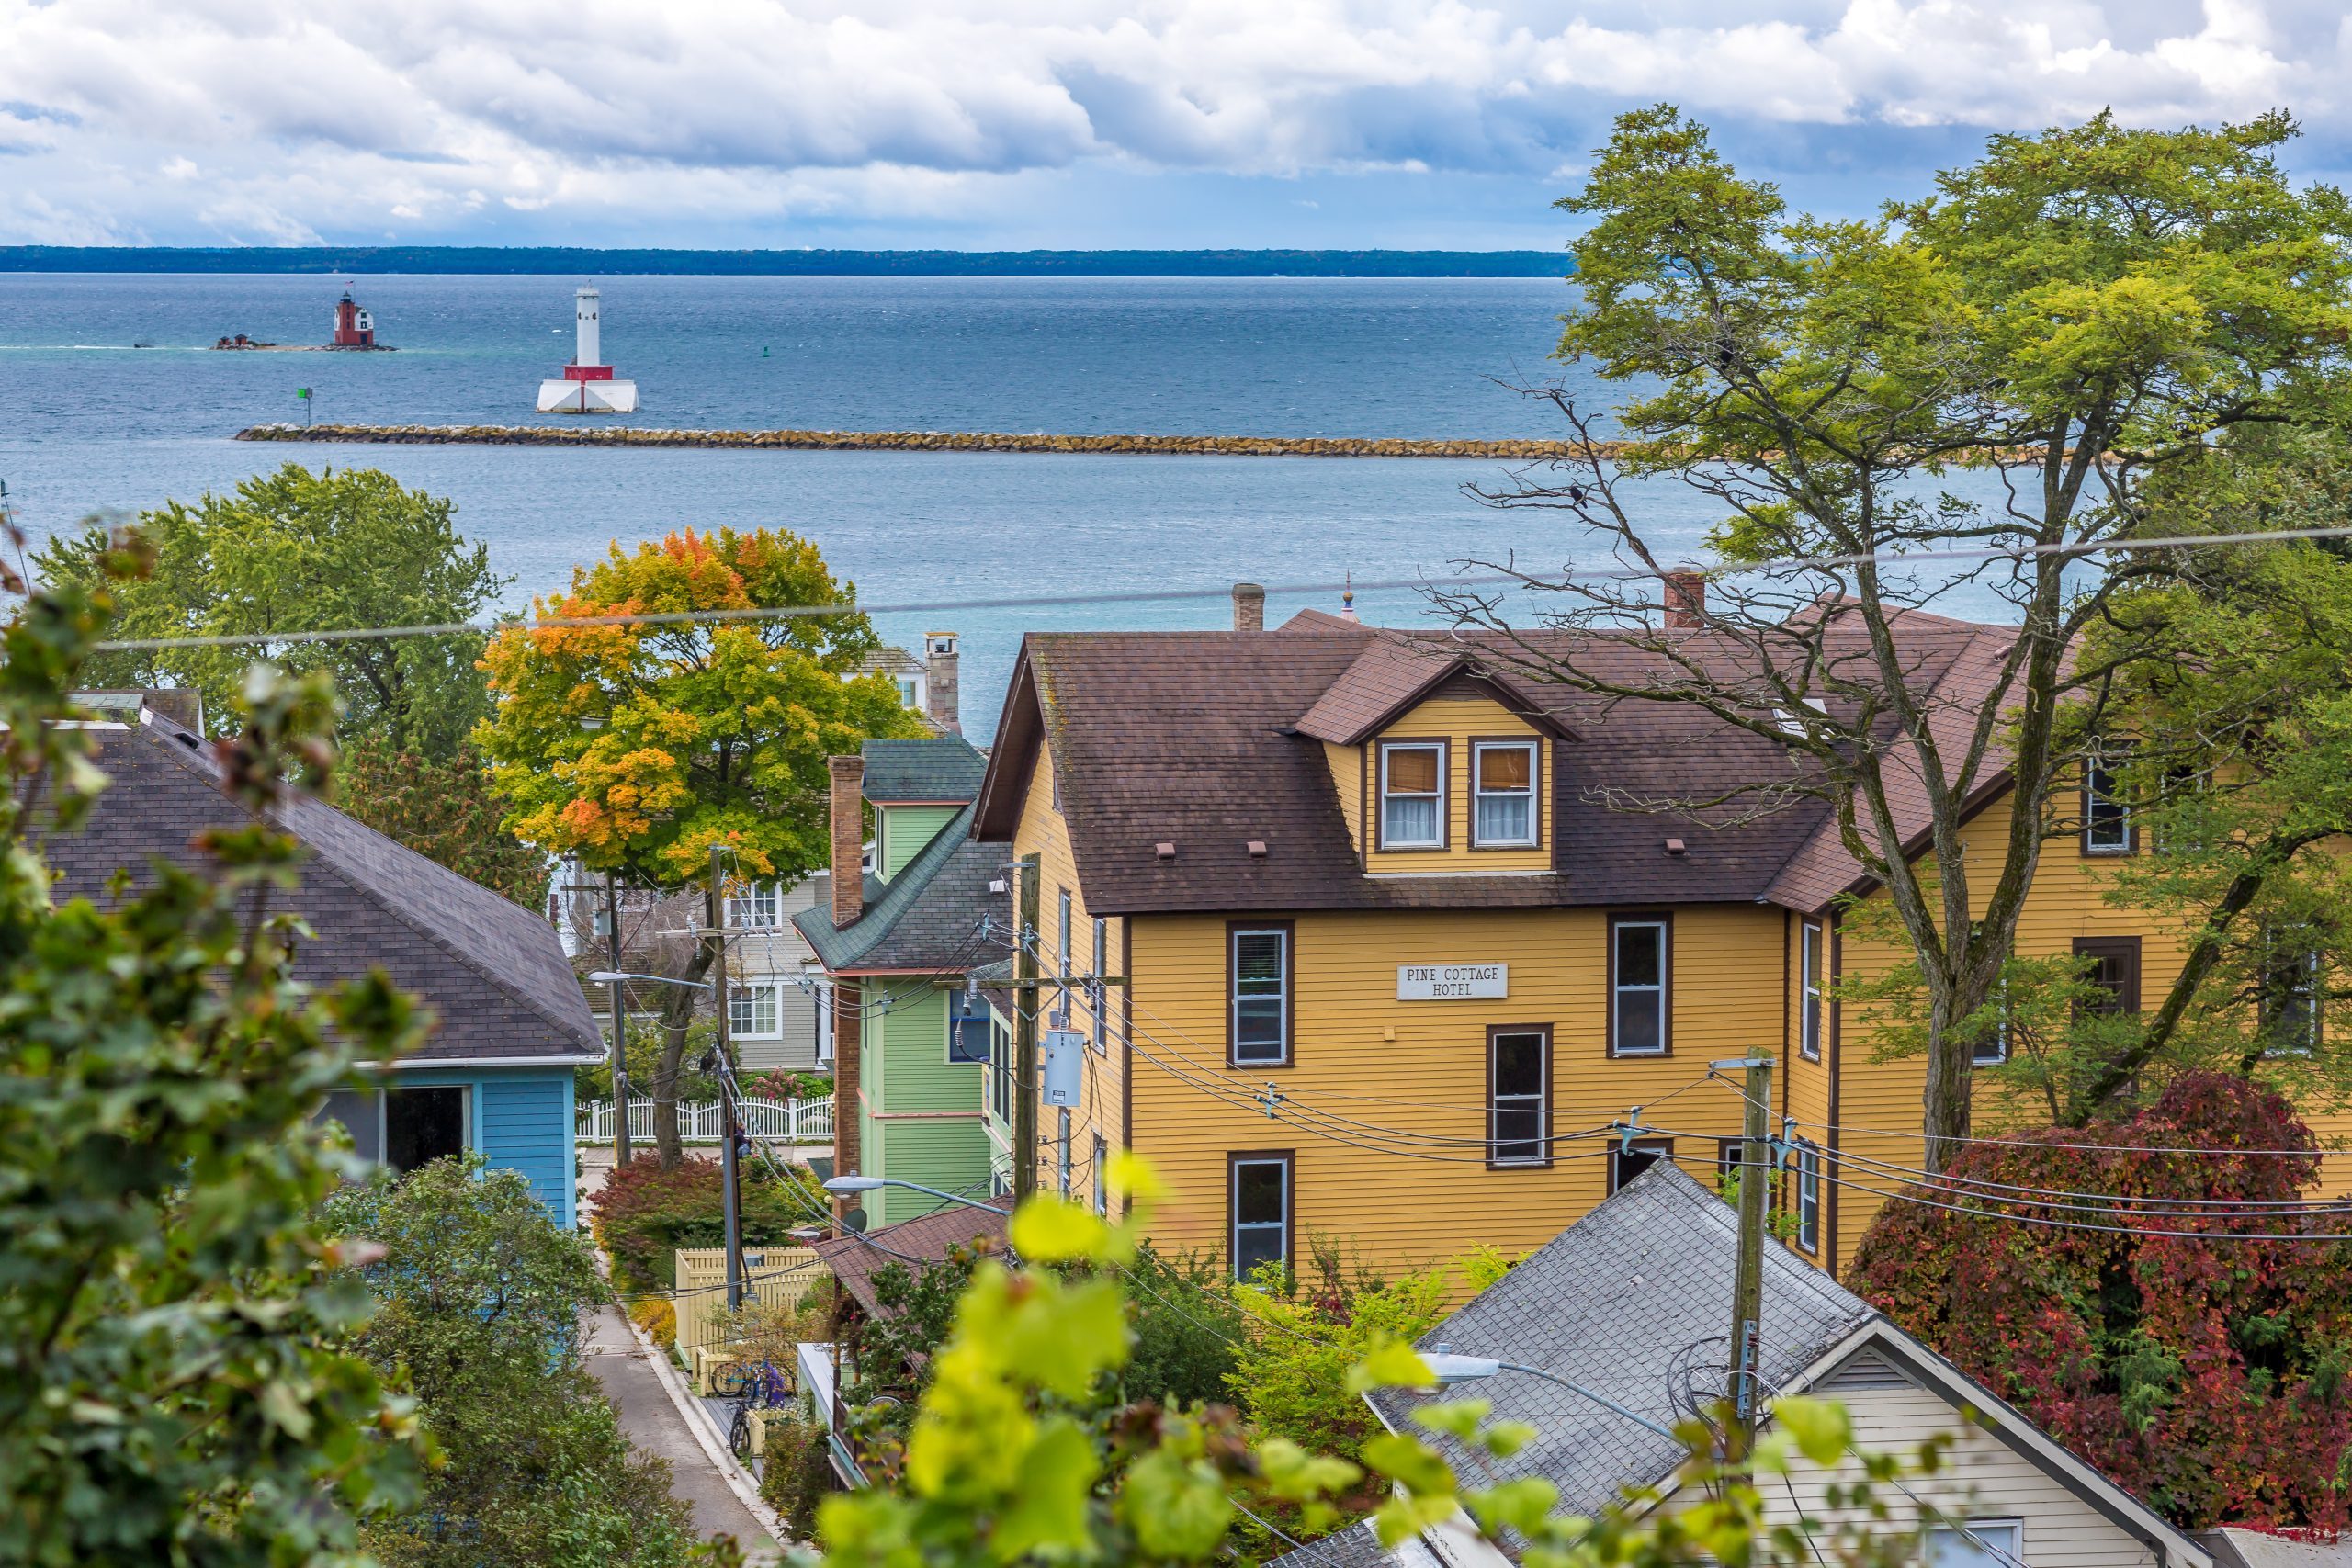 A view of the water surrounding Michigan’s Mackinac Island with Bogan Lane and Pine Cottage B&B in the foreground.